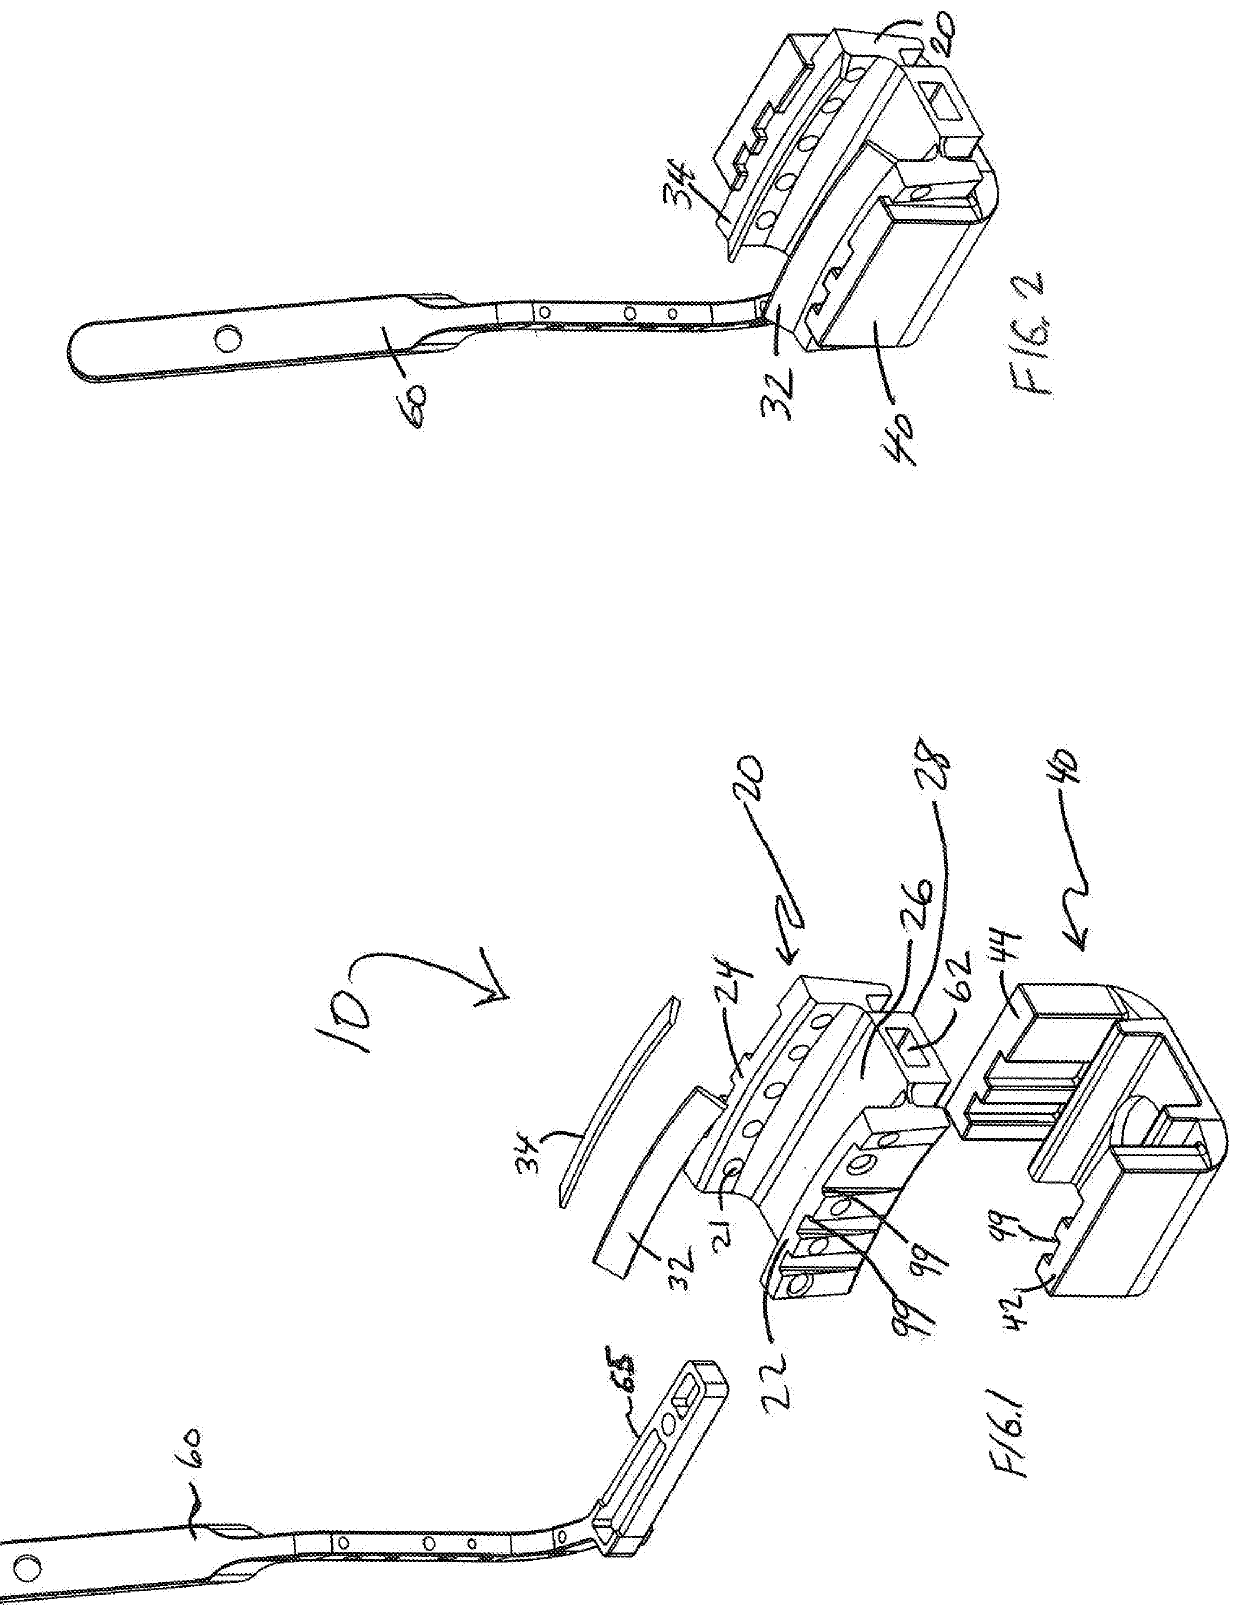 Stable affixation system for guided dental implantation